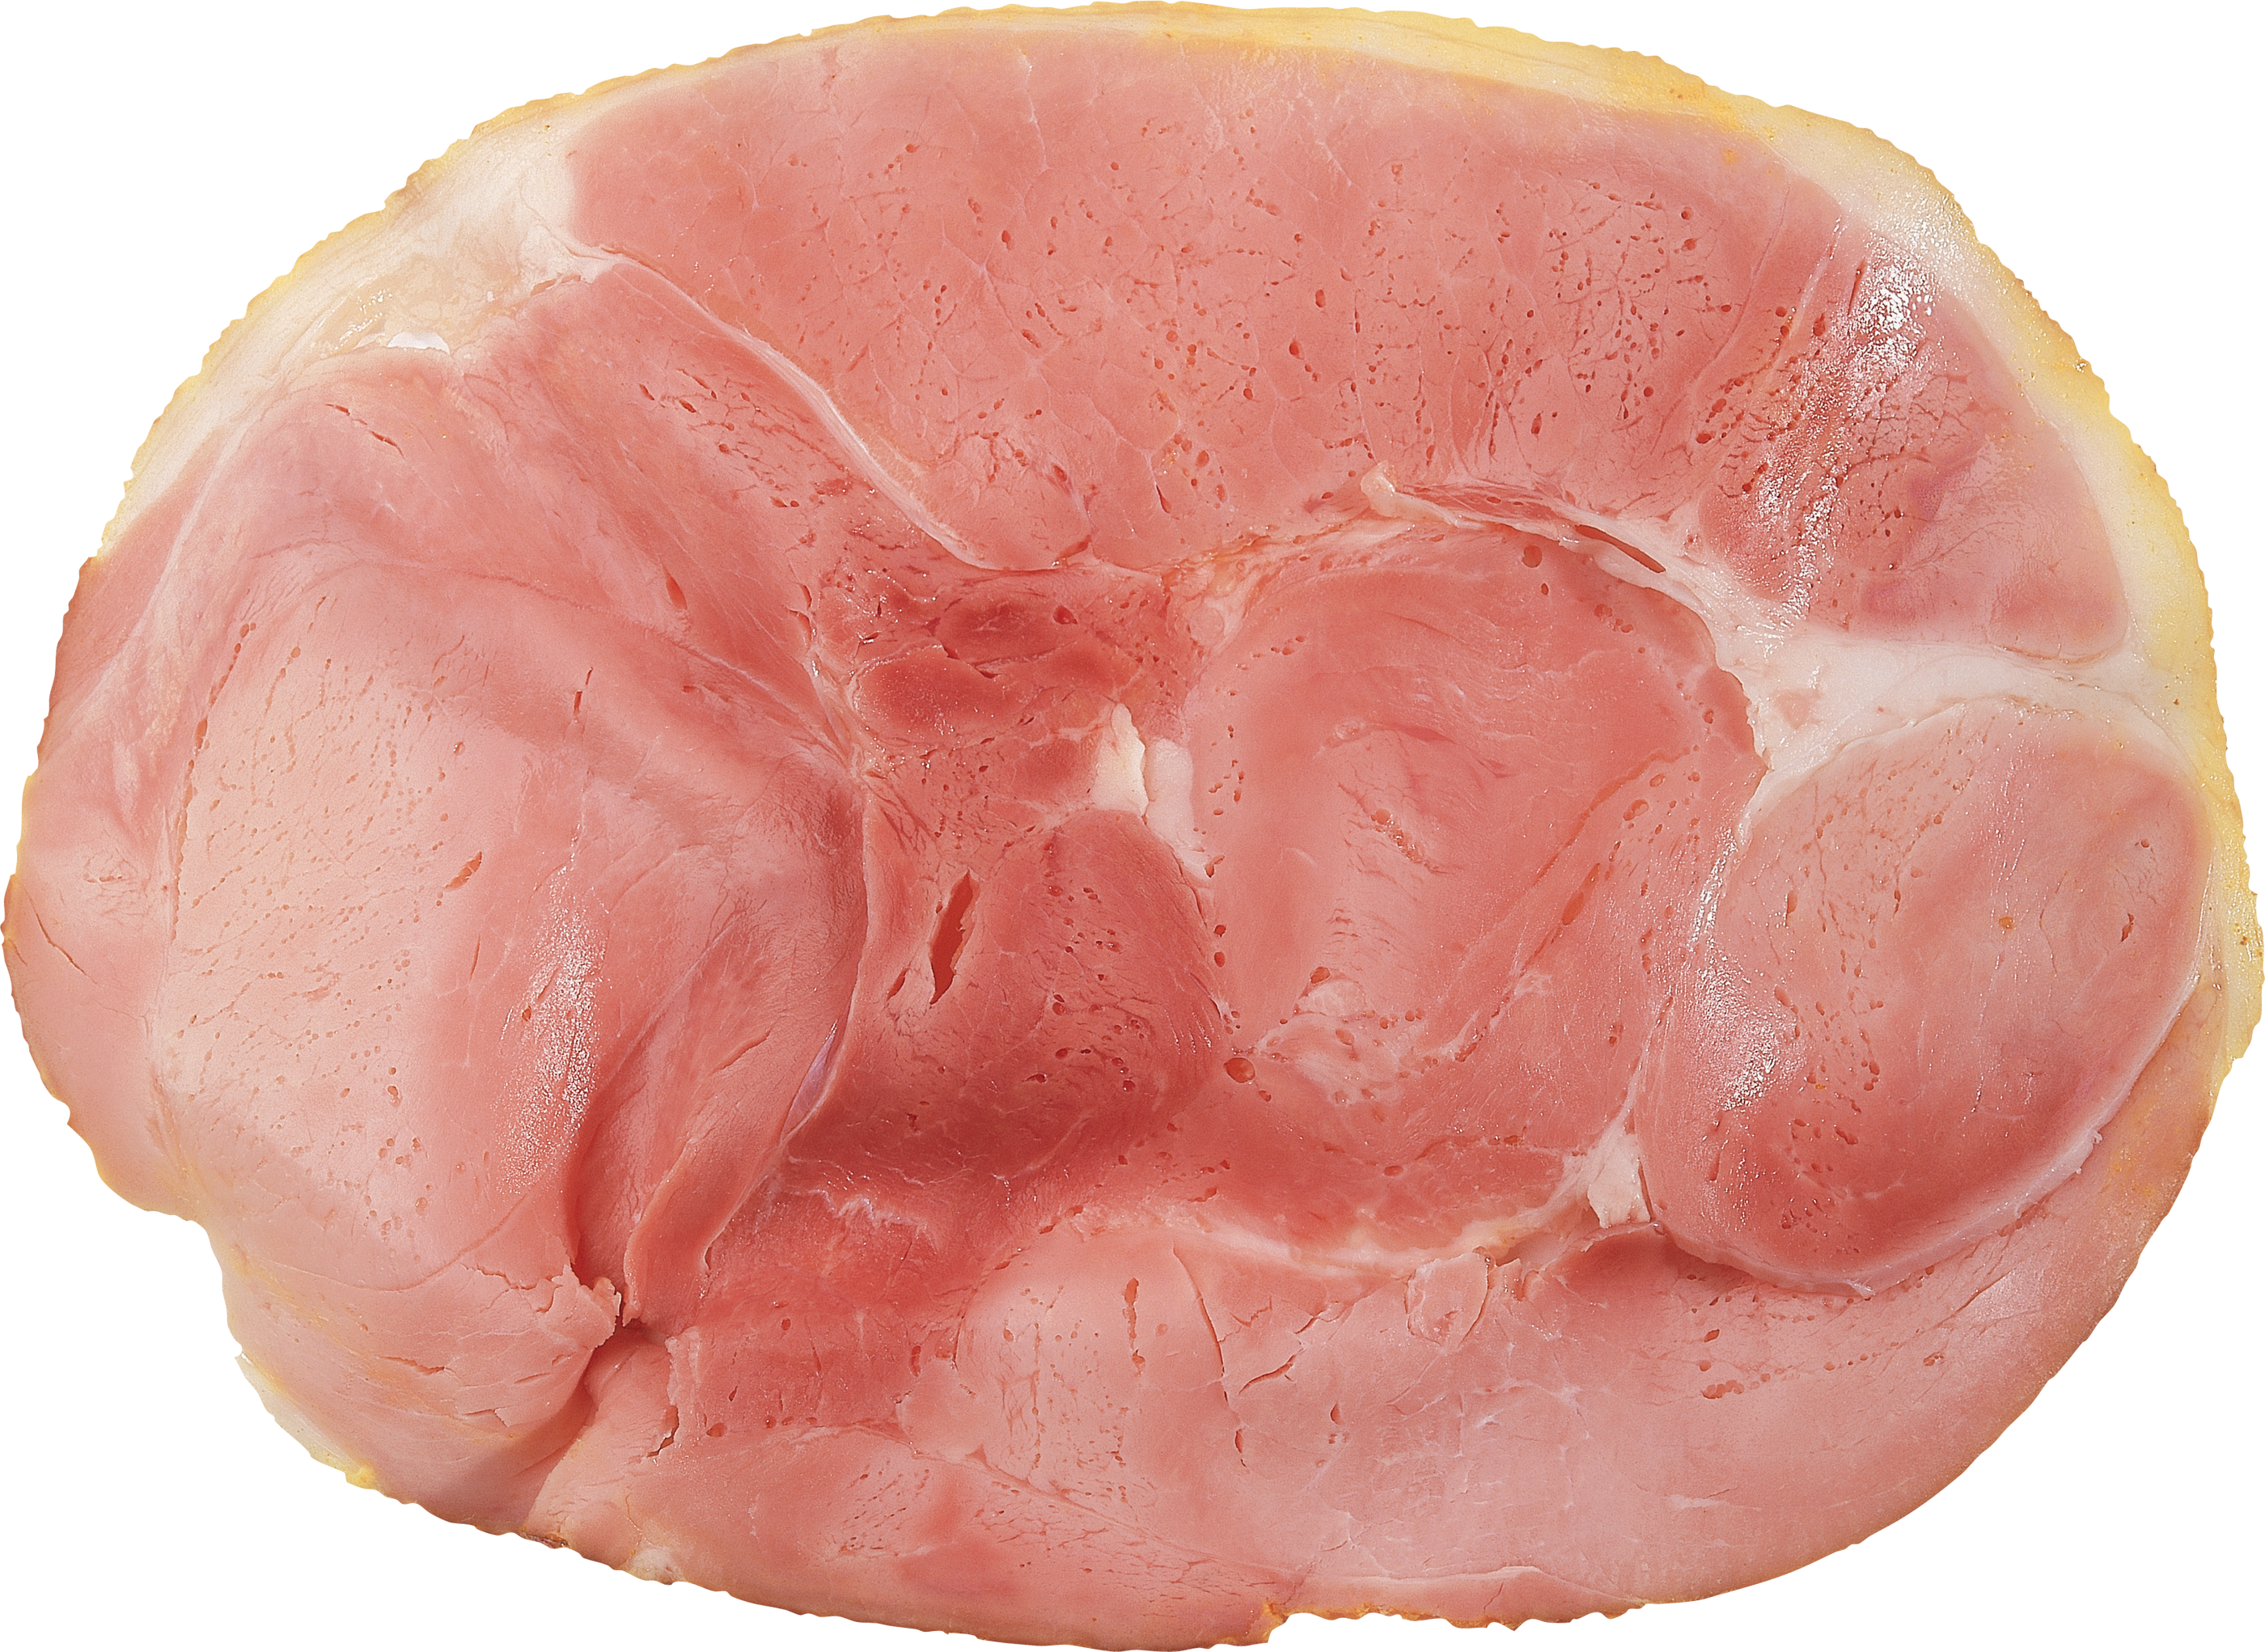 Png image free download. Meat clipart meat slice